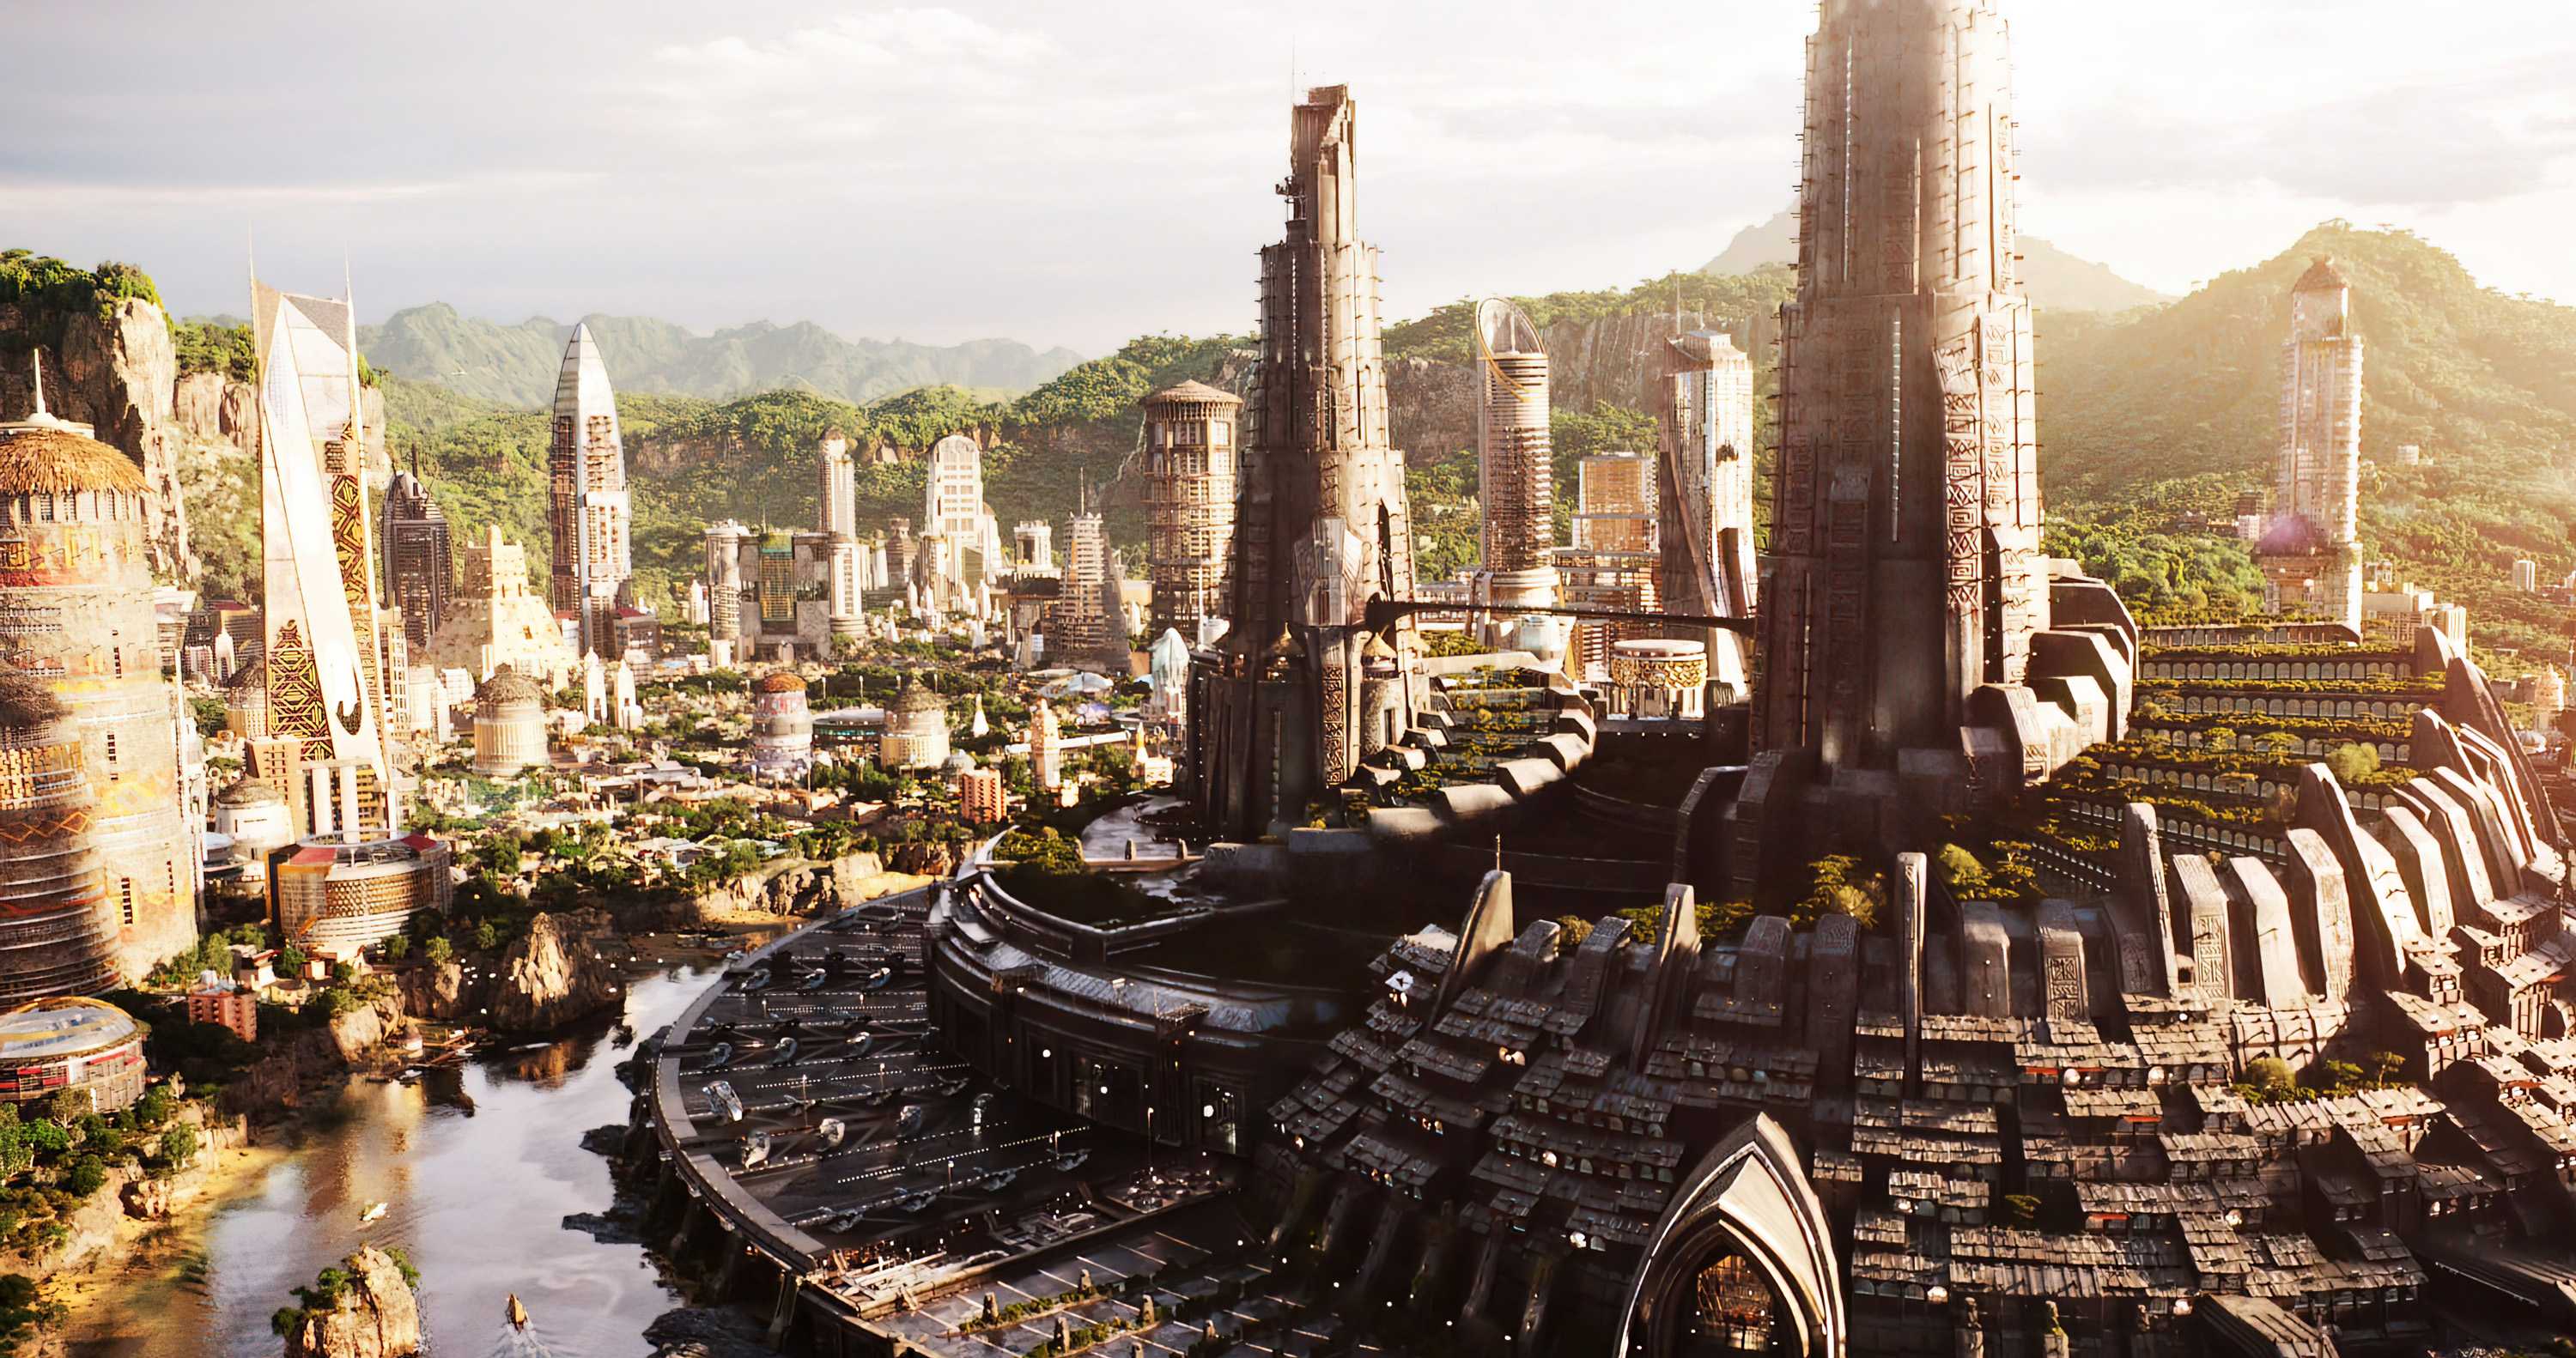 An ariel view of the city of Wakanda with tall buildings nestled in valley of some green mountains.